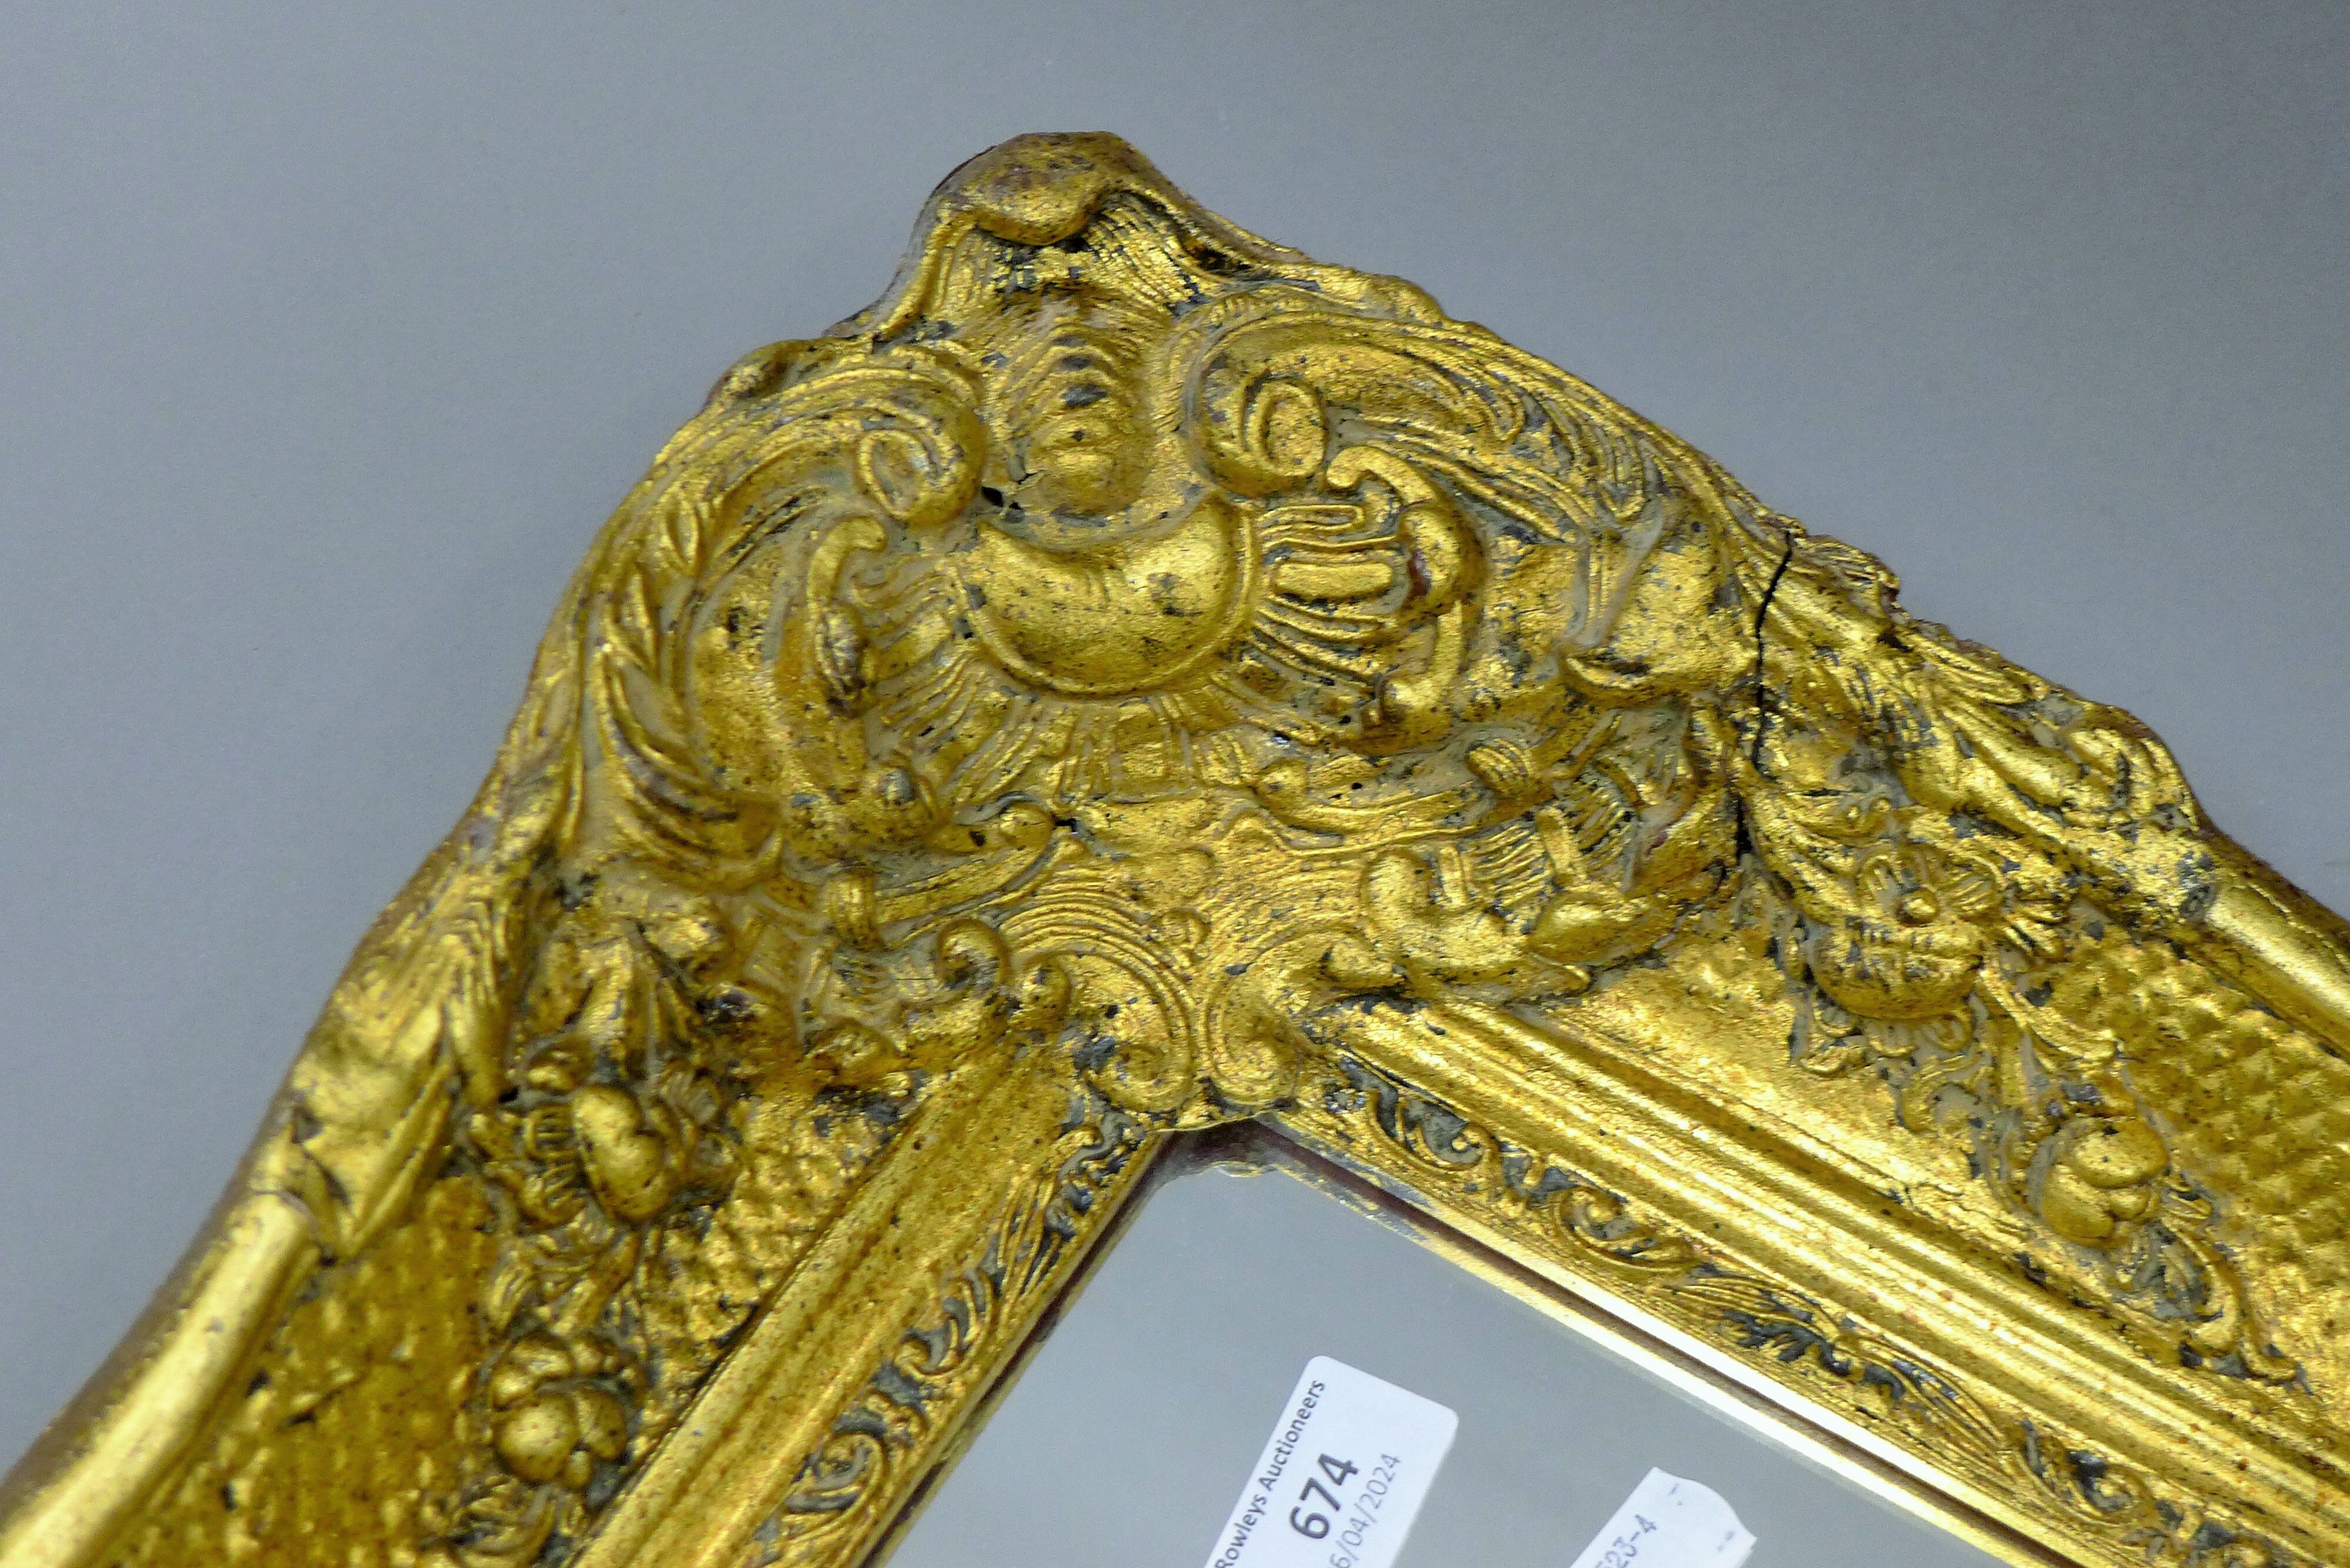 A wall mirror in a large ornate gilt frame 49 x 59 cm overall. - Image 2 of 2